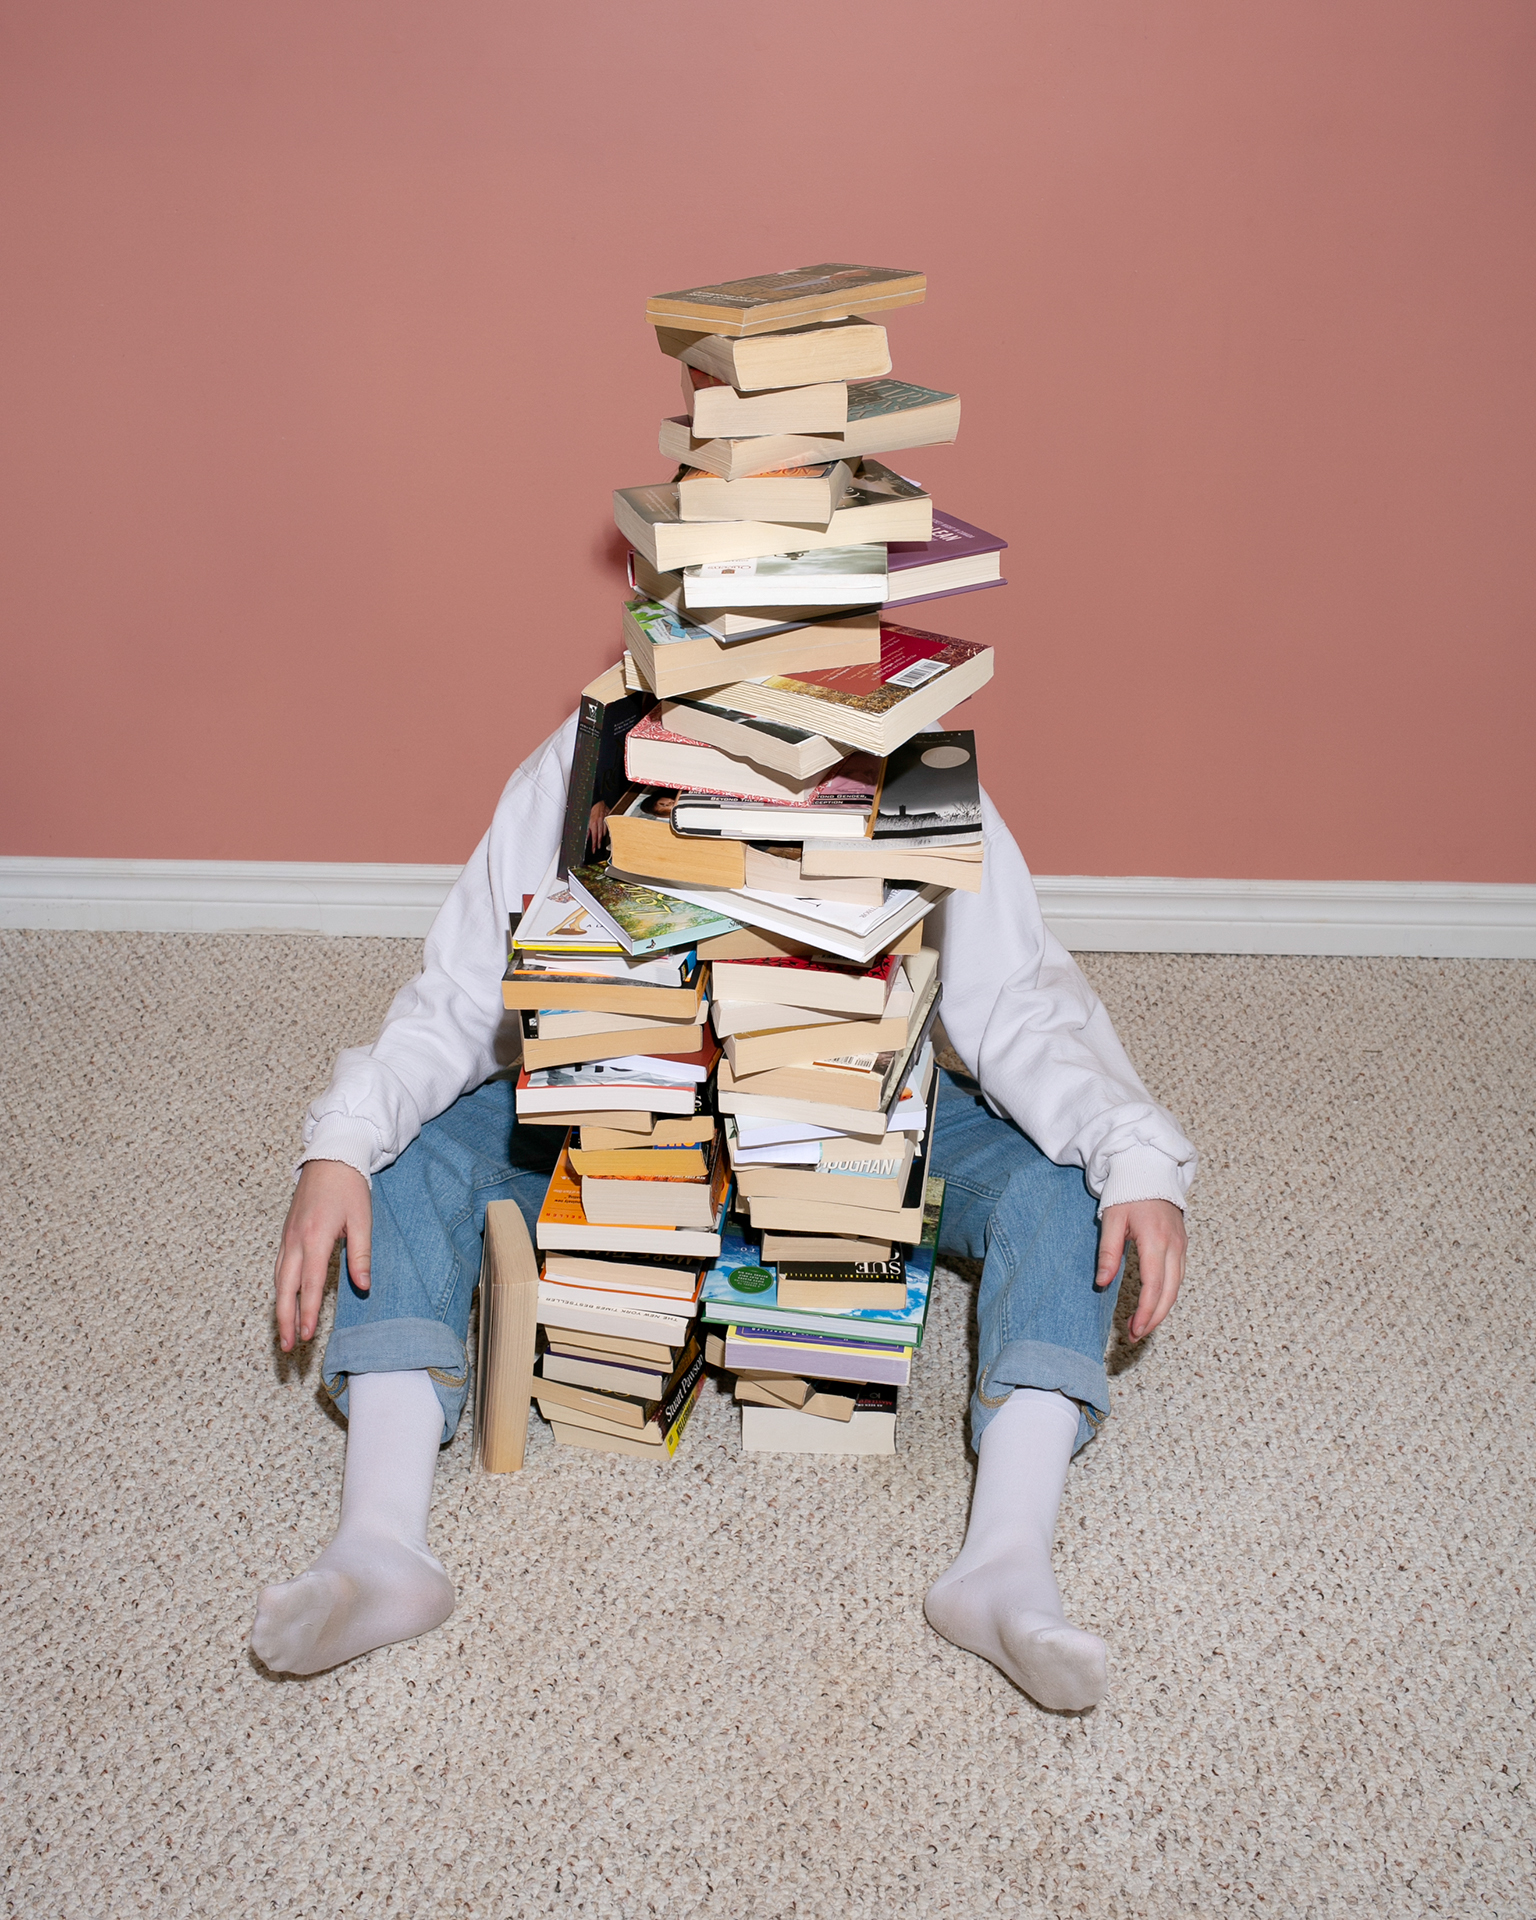 A person sits behind a tall stack of books with their legs sticking out from either side. The books completely hide the face of the person in the photo.